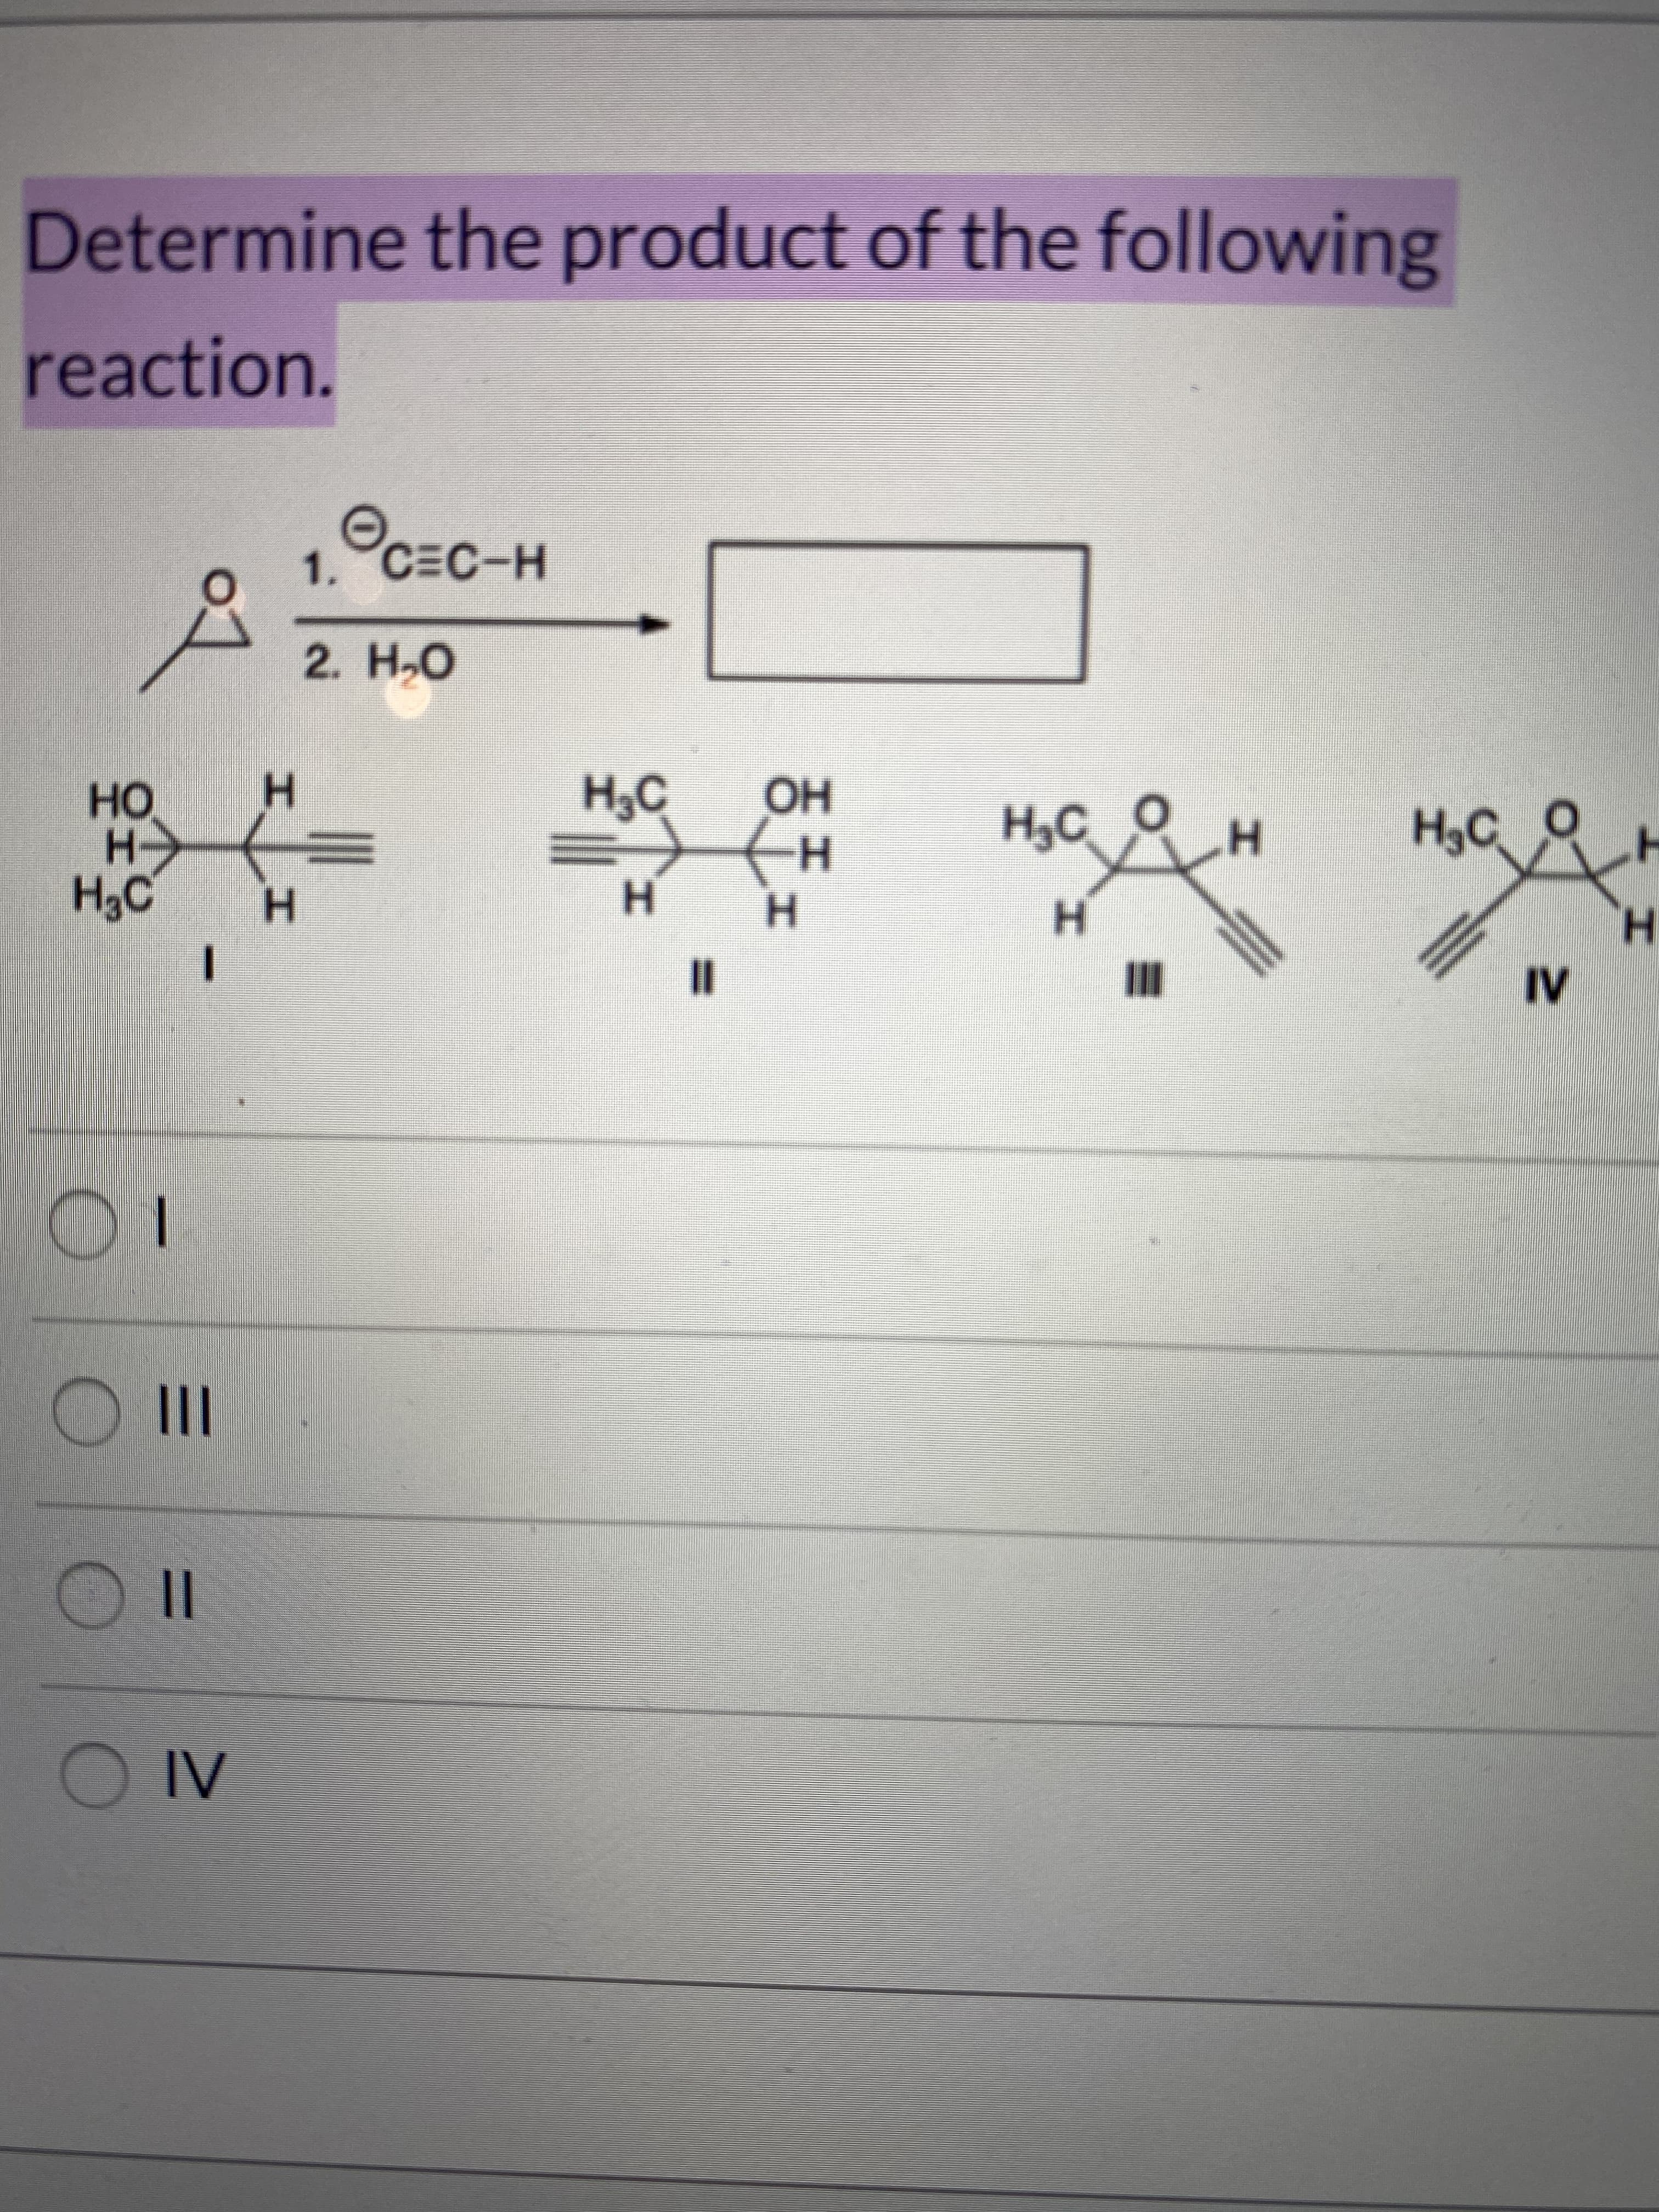 Determine the product of the following
reaction.
1. CEC-H
С-н
2. H.O
н
H3C
Он
но
Н-
H3C
H3C
Н,с
н
H3C
н
н
н
H.
I3D
IV
01
II
IV
